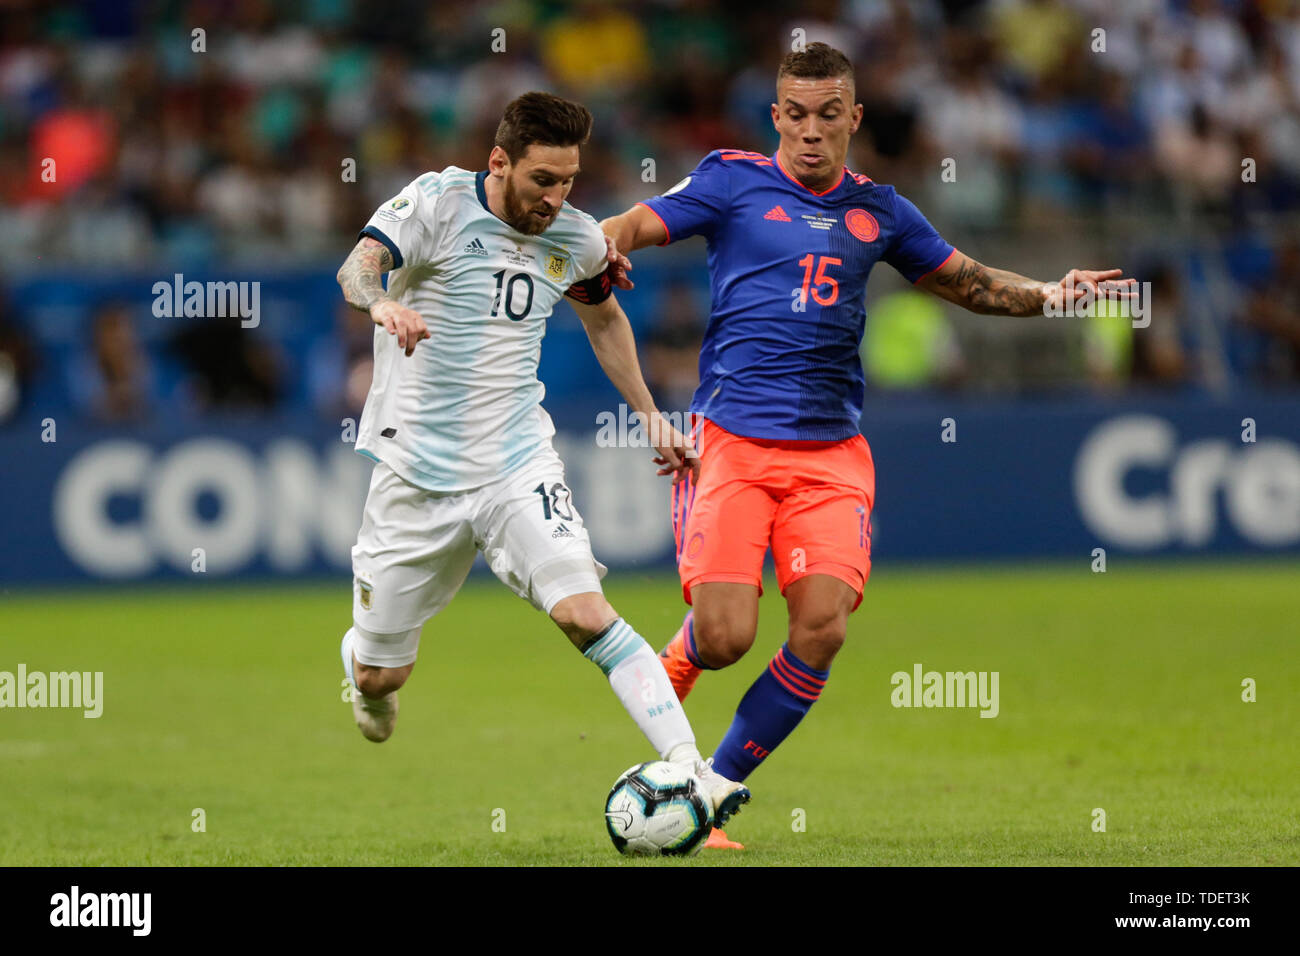 Salvador, Brazil. 15th June, 2019. Argentina's Lionel Messi(L) competes with Mateus Uribe of Colombia during the Copa America 2019 Group B match between Argentina and Colombia in Salvador, Brazil, June 15, 2019. Colombia won 2-0. Credit: Francisco Canedo/Xinhua/Alamy Live News Stock Photo